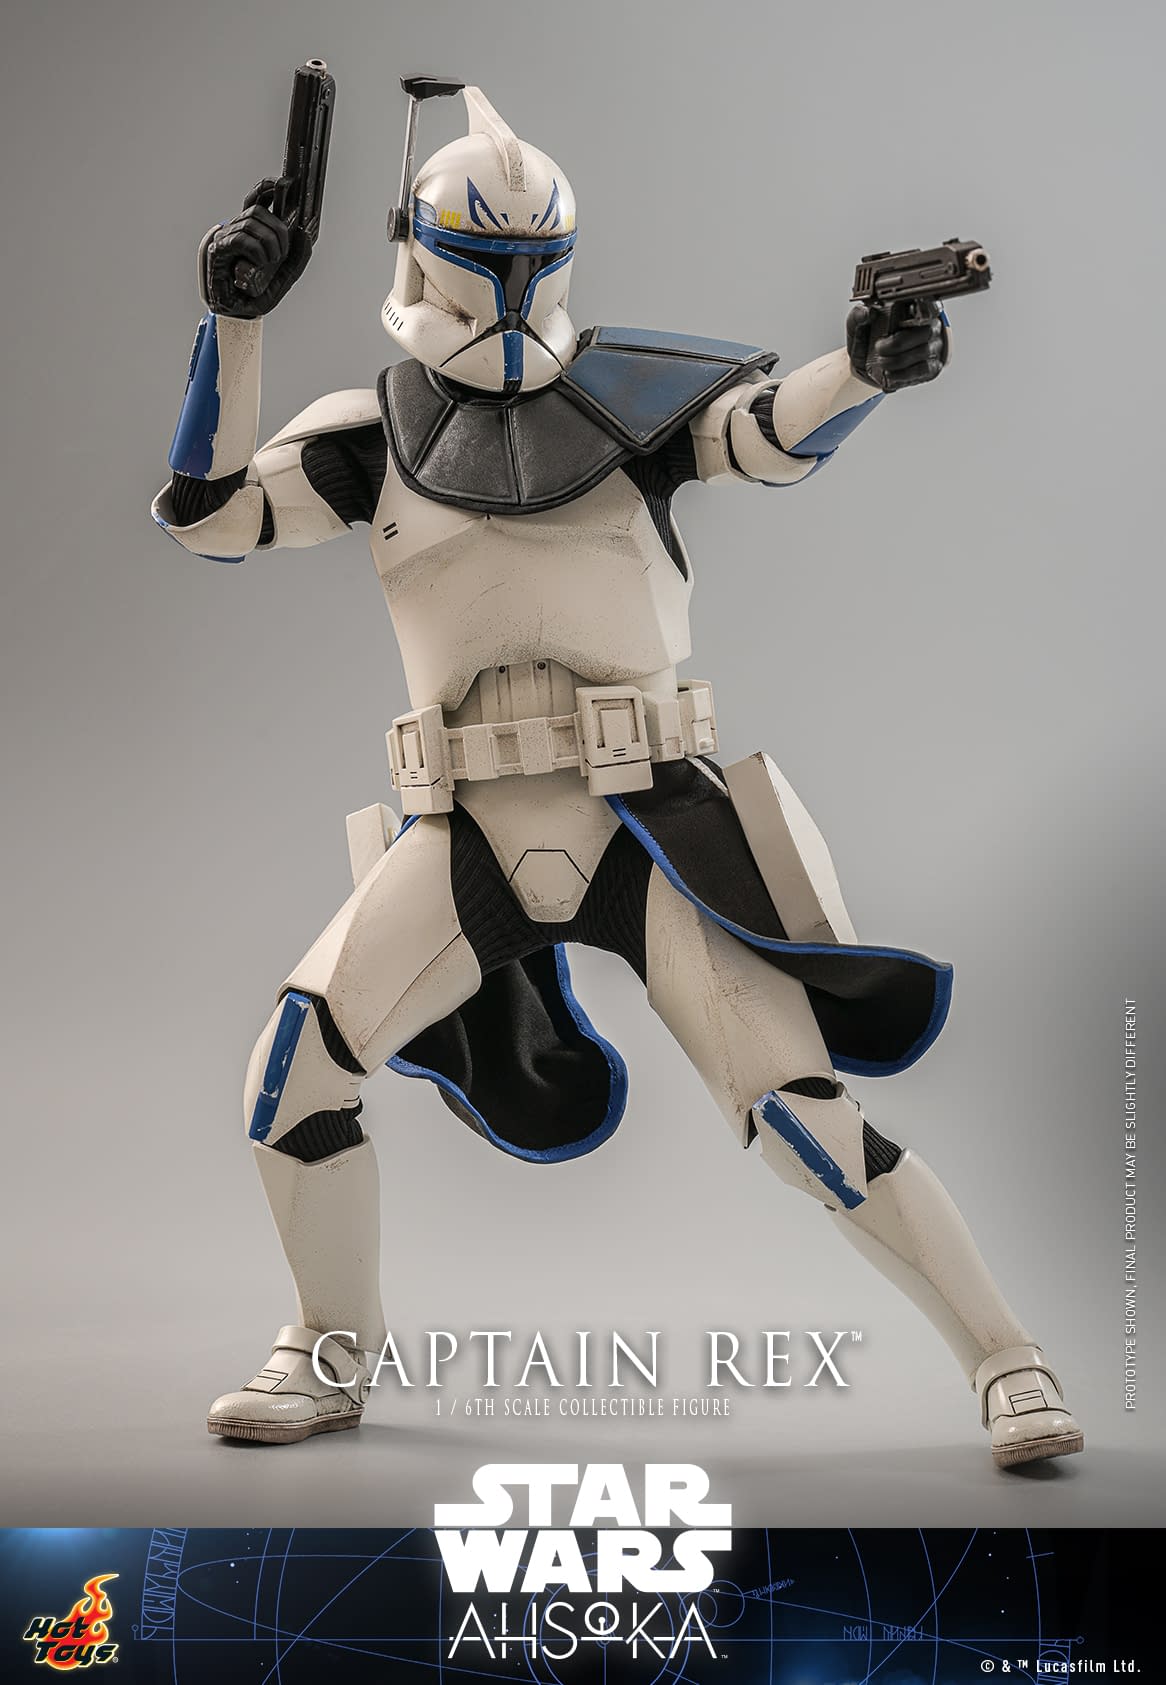 Captain Rex Returns to Hot Toys with New Star Wars 1/6 Scale Release11